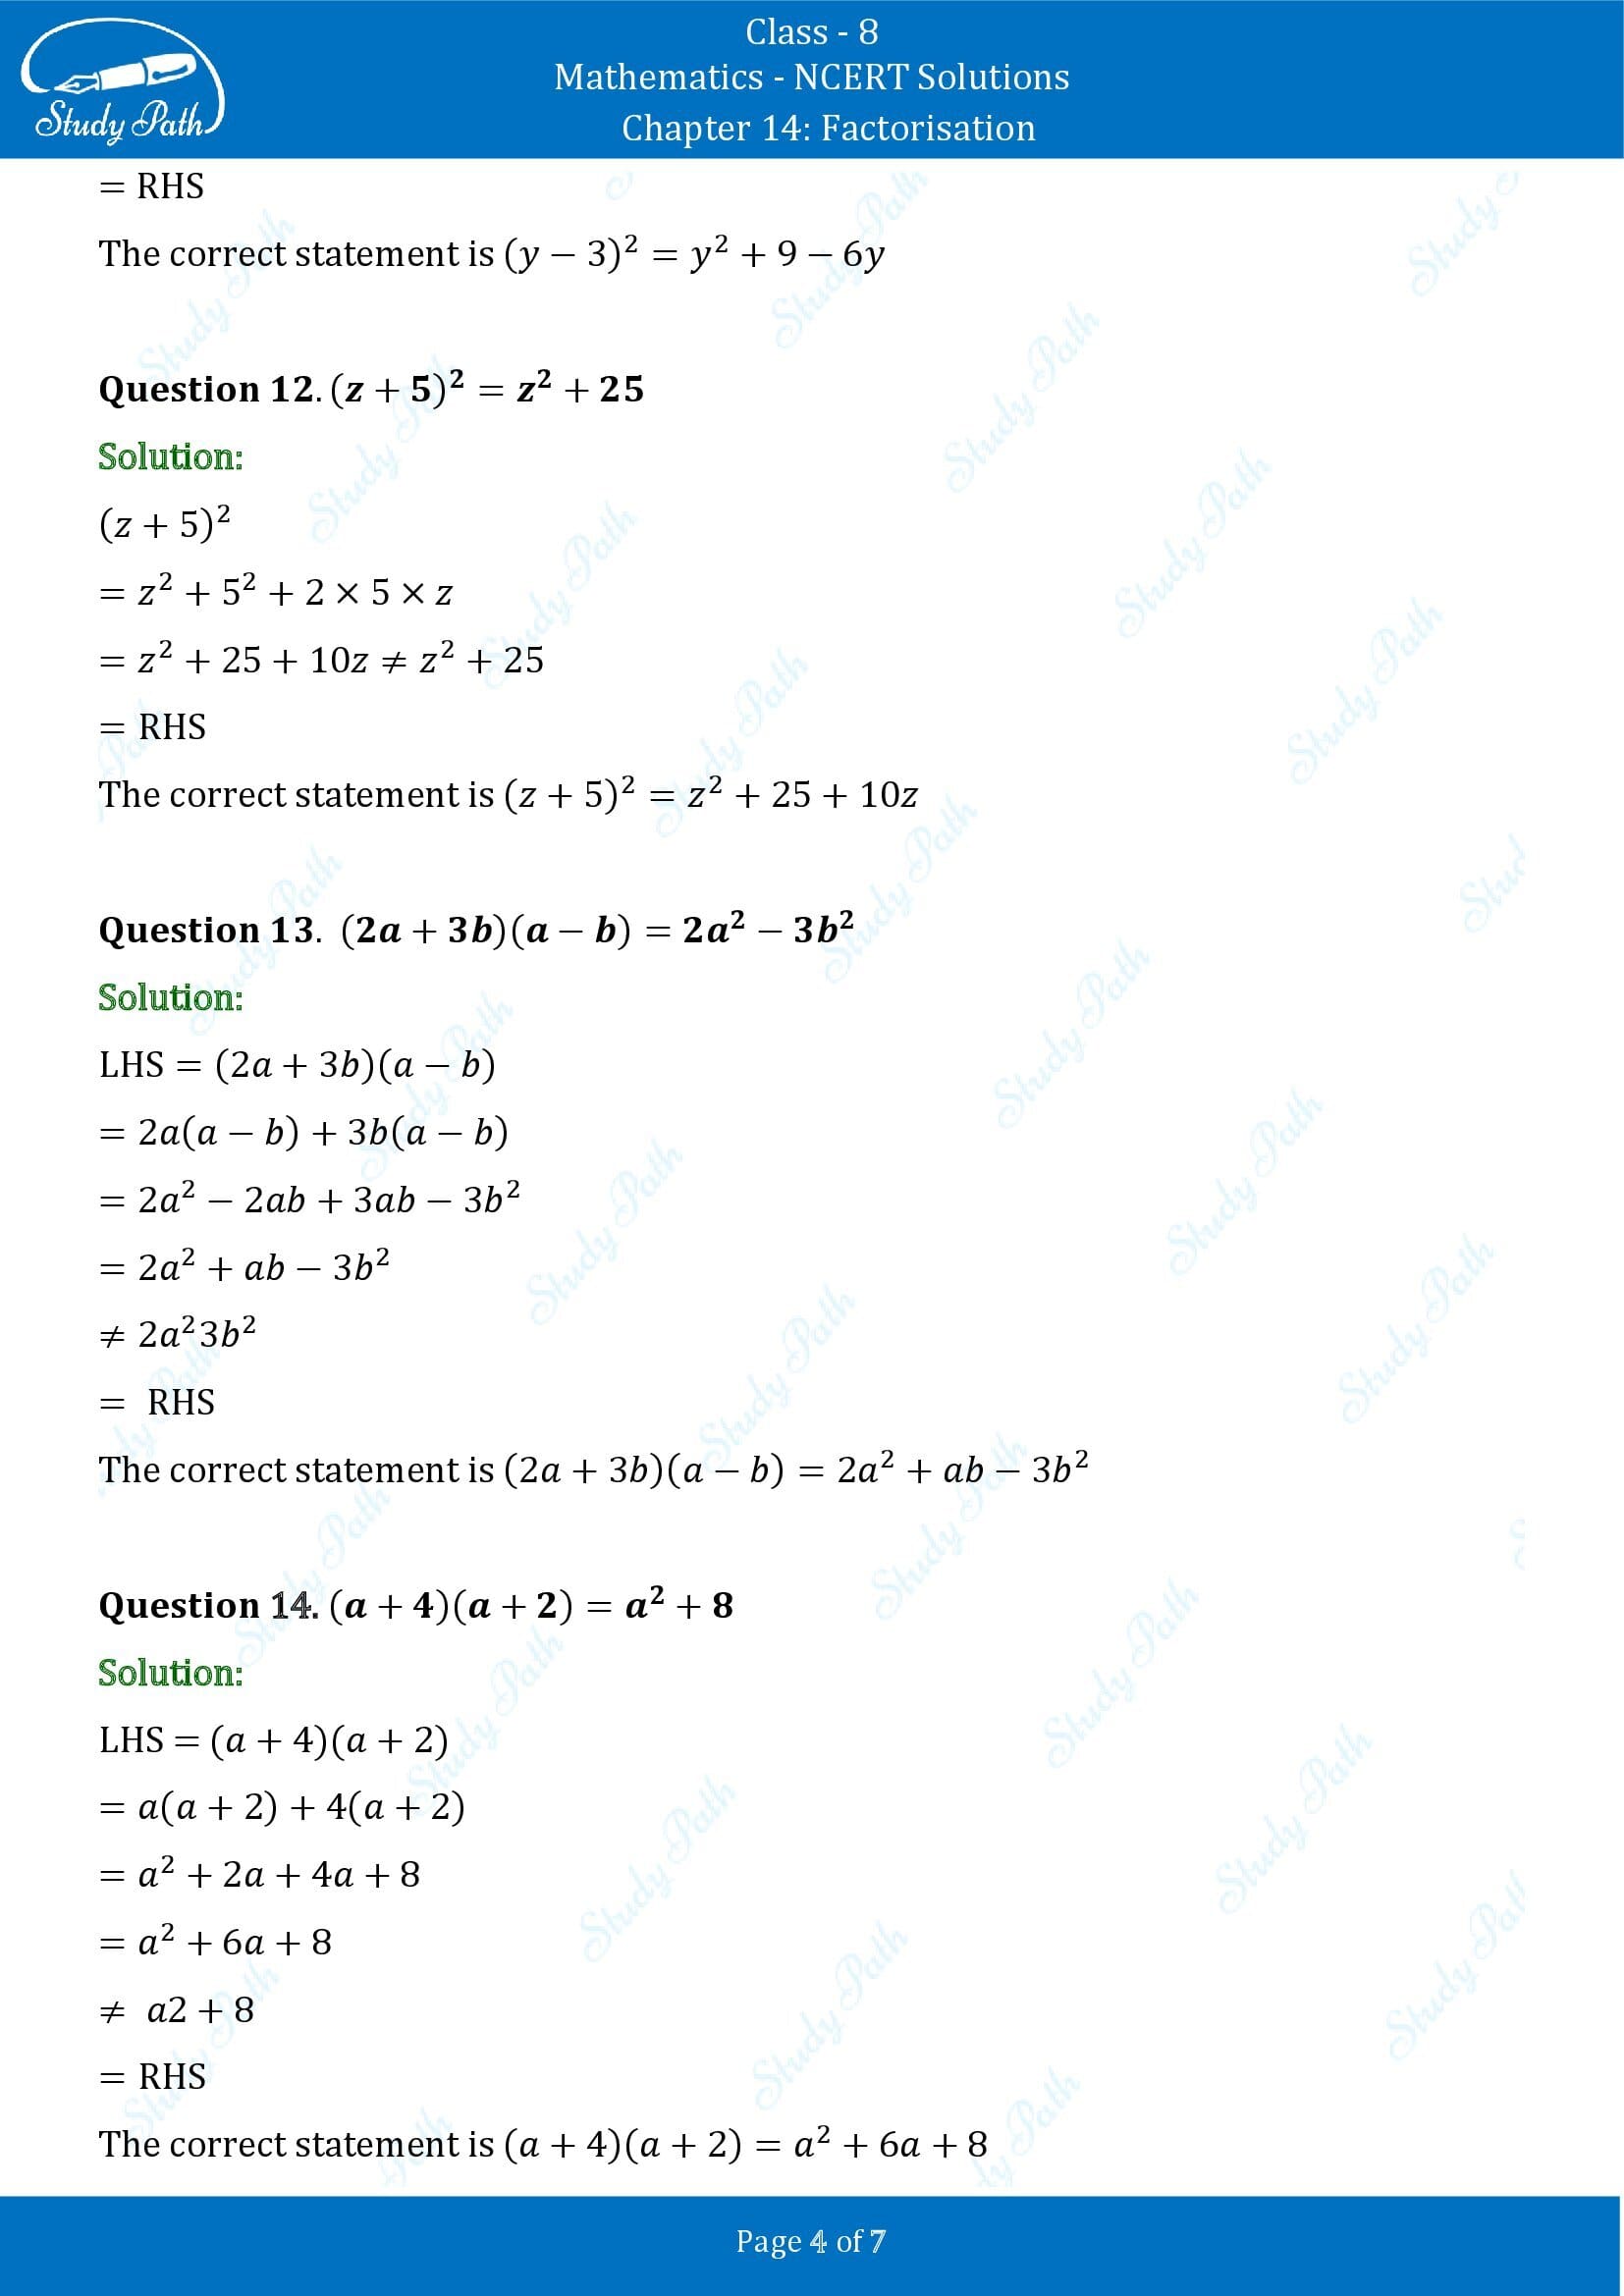 NCERT Solutions for Class 8 Maths Chapter 14 Factorisation Exercise 14.4 00004